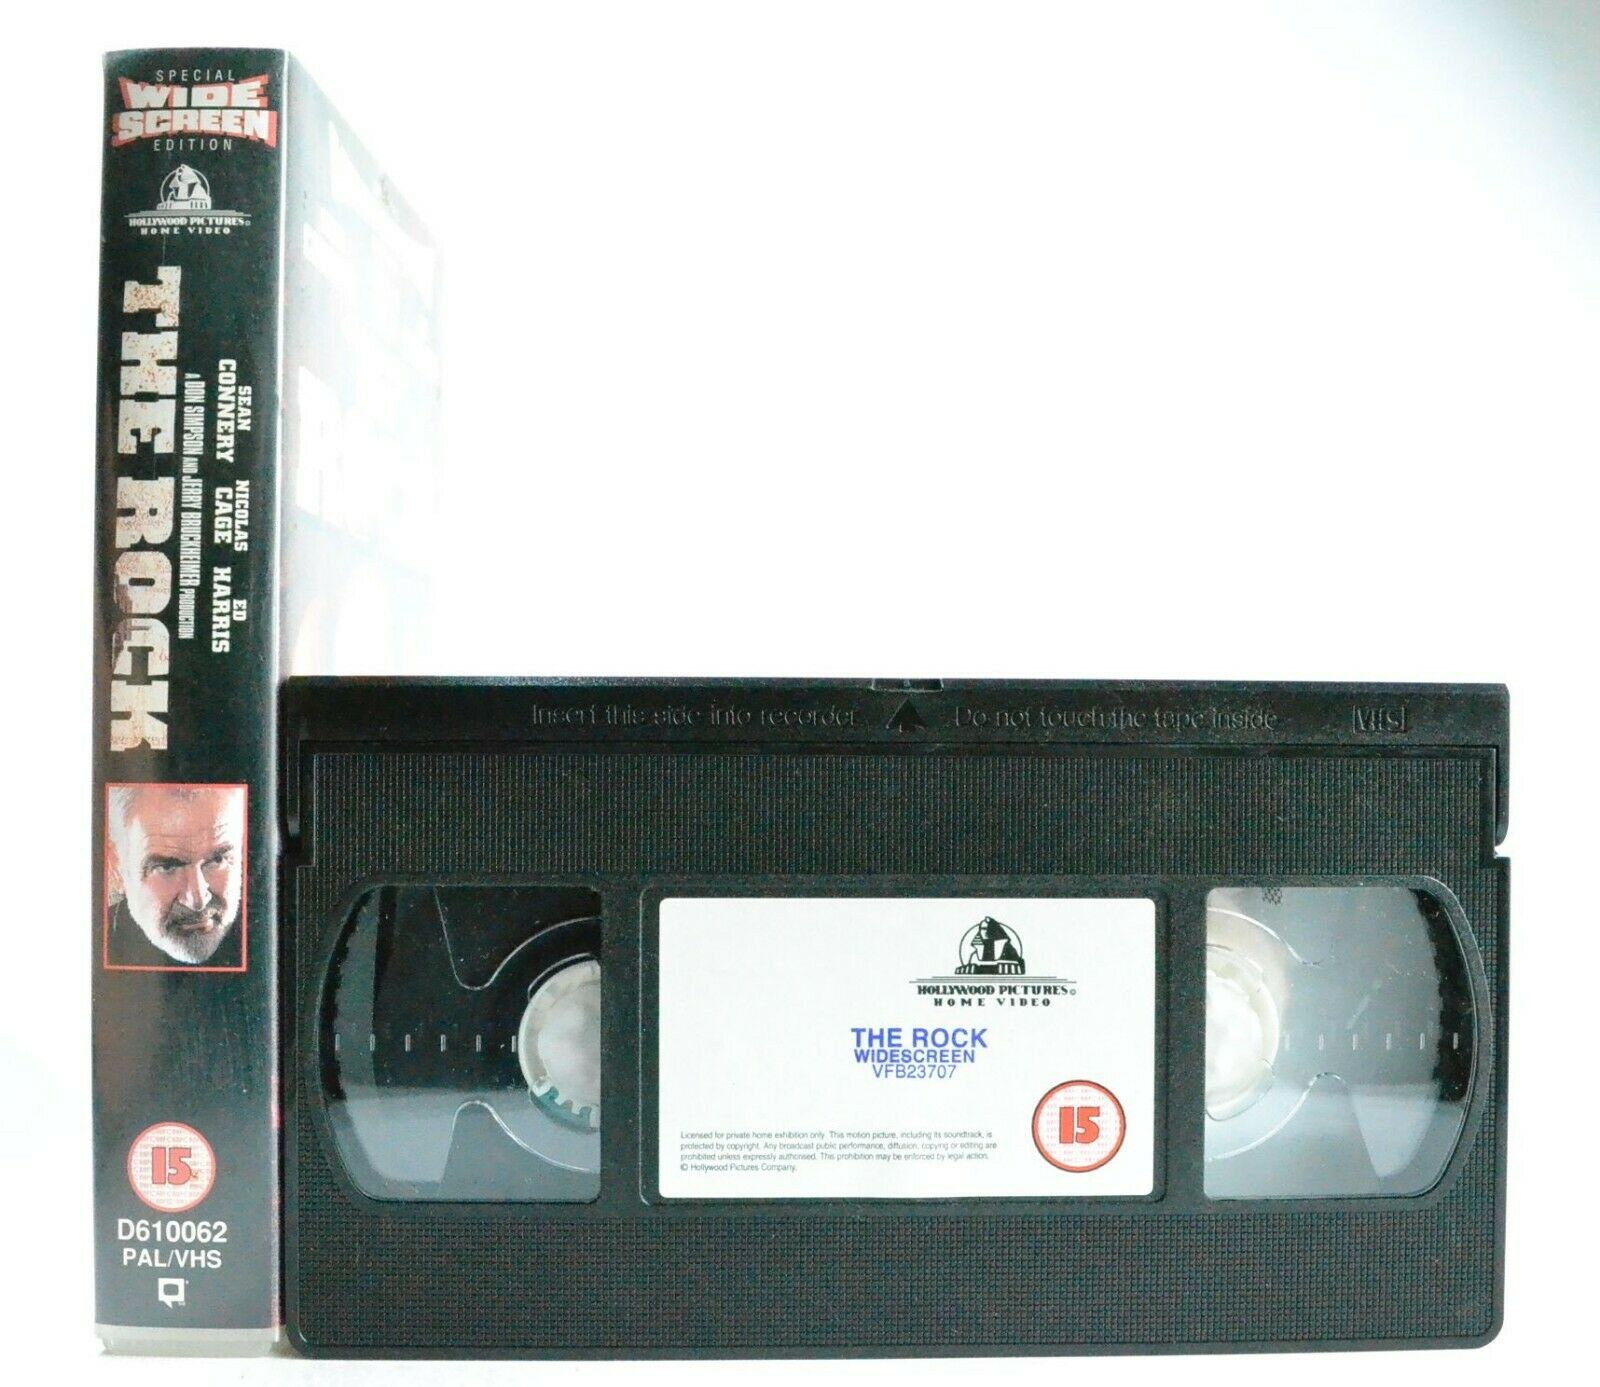 The Rock: Film By M.Bay (1996) - Action - Widescreen - Sean Connery Movie - VHS-